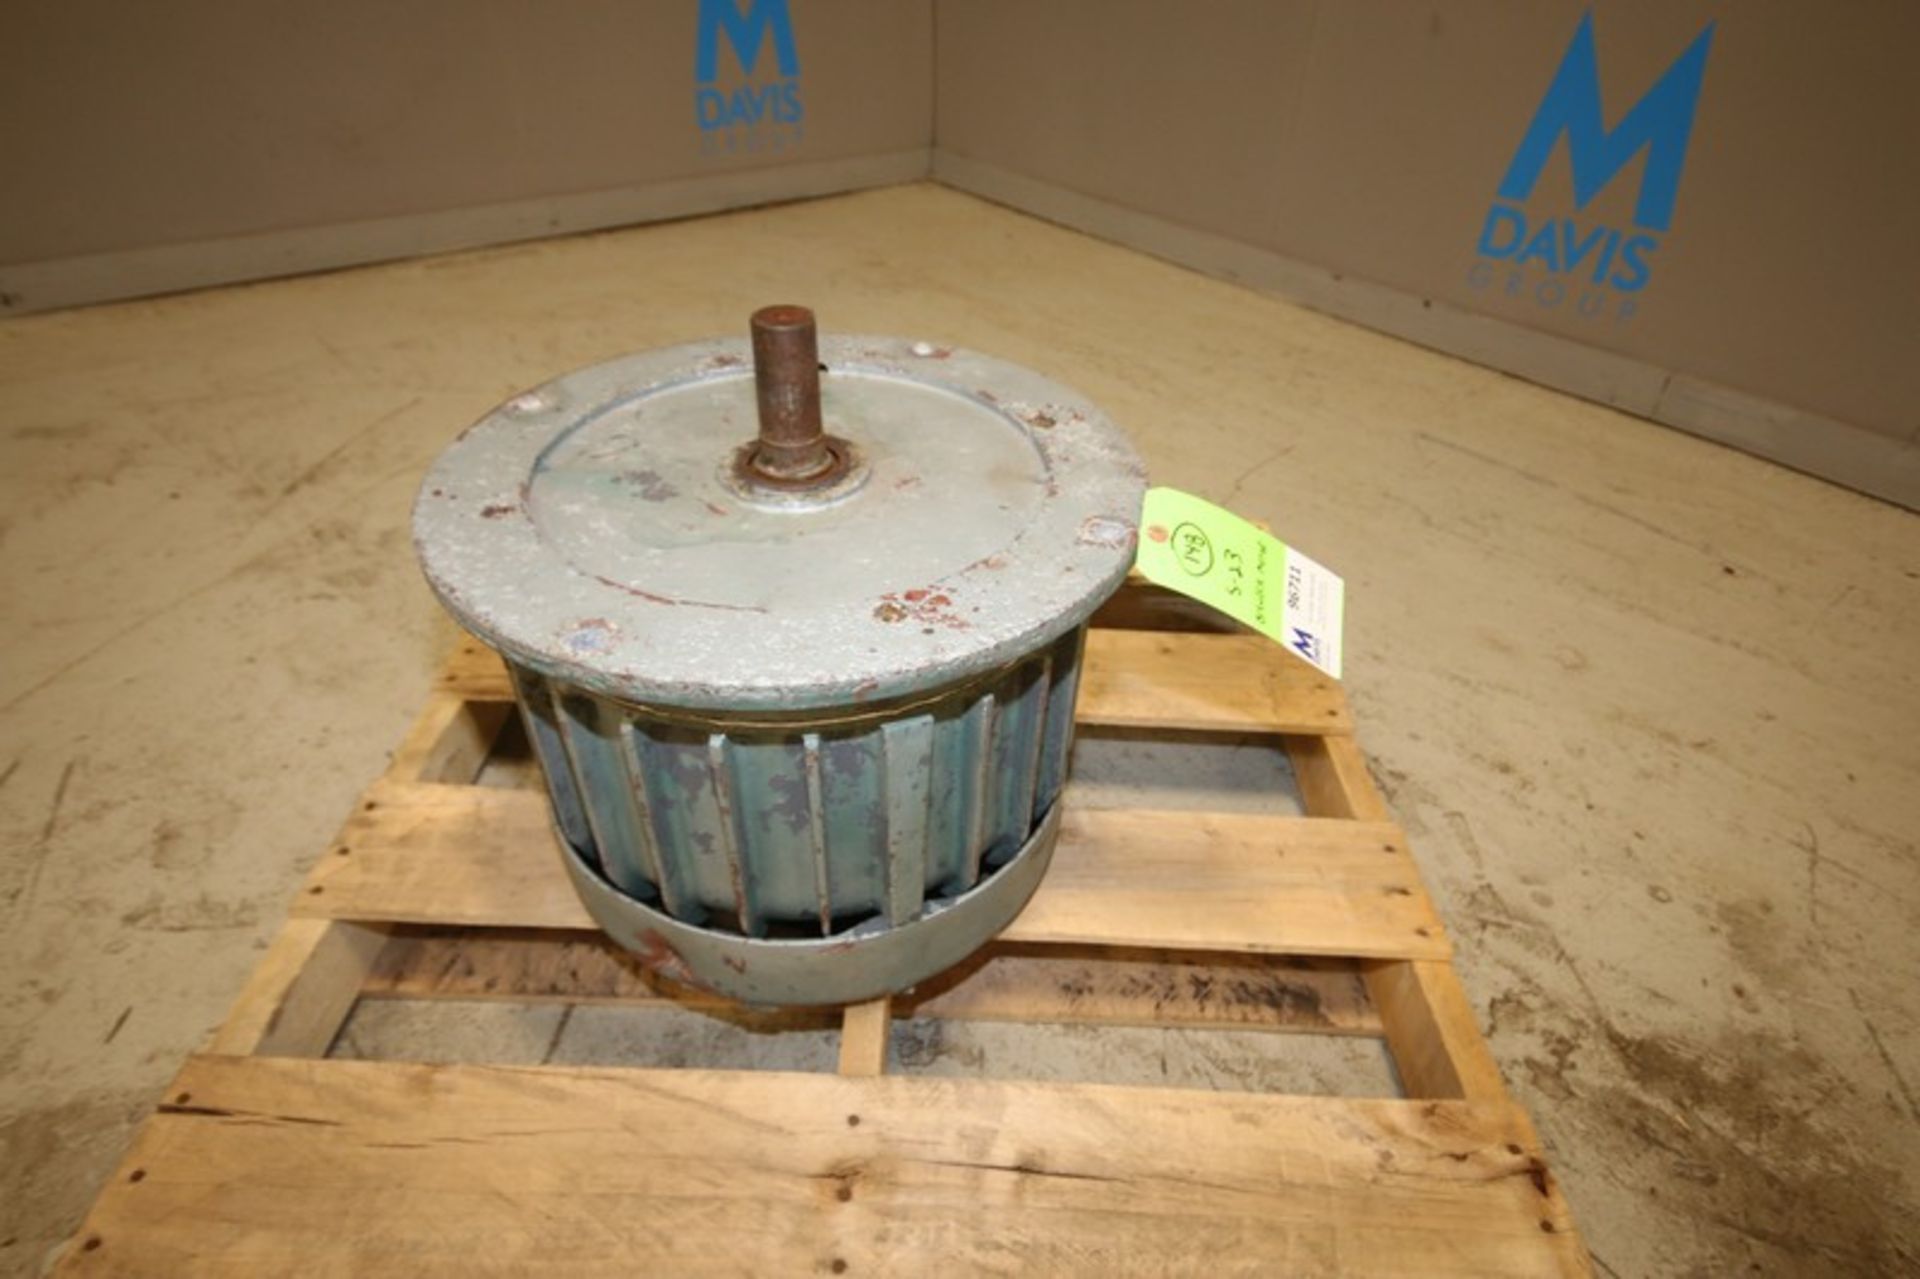 Likwifier / Blender Spare Motor, Aprox. 20 hp, (ID Plate Missing) (INV#96711) (Located @ the MDG